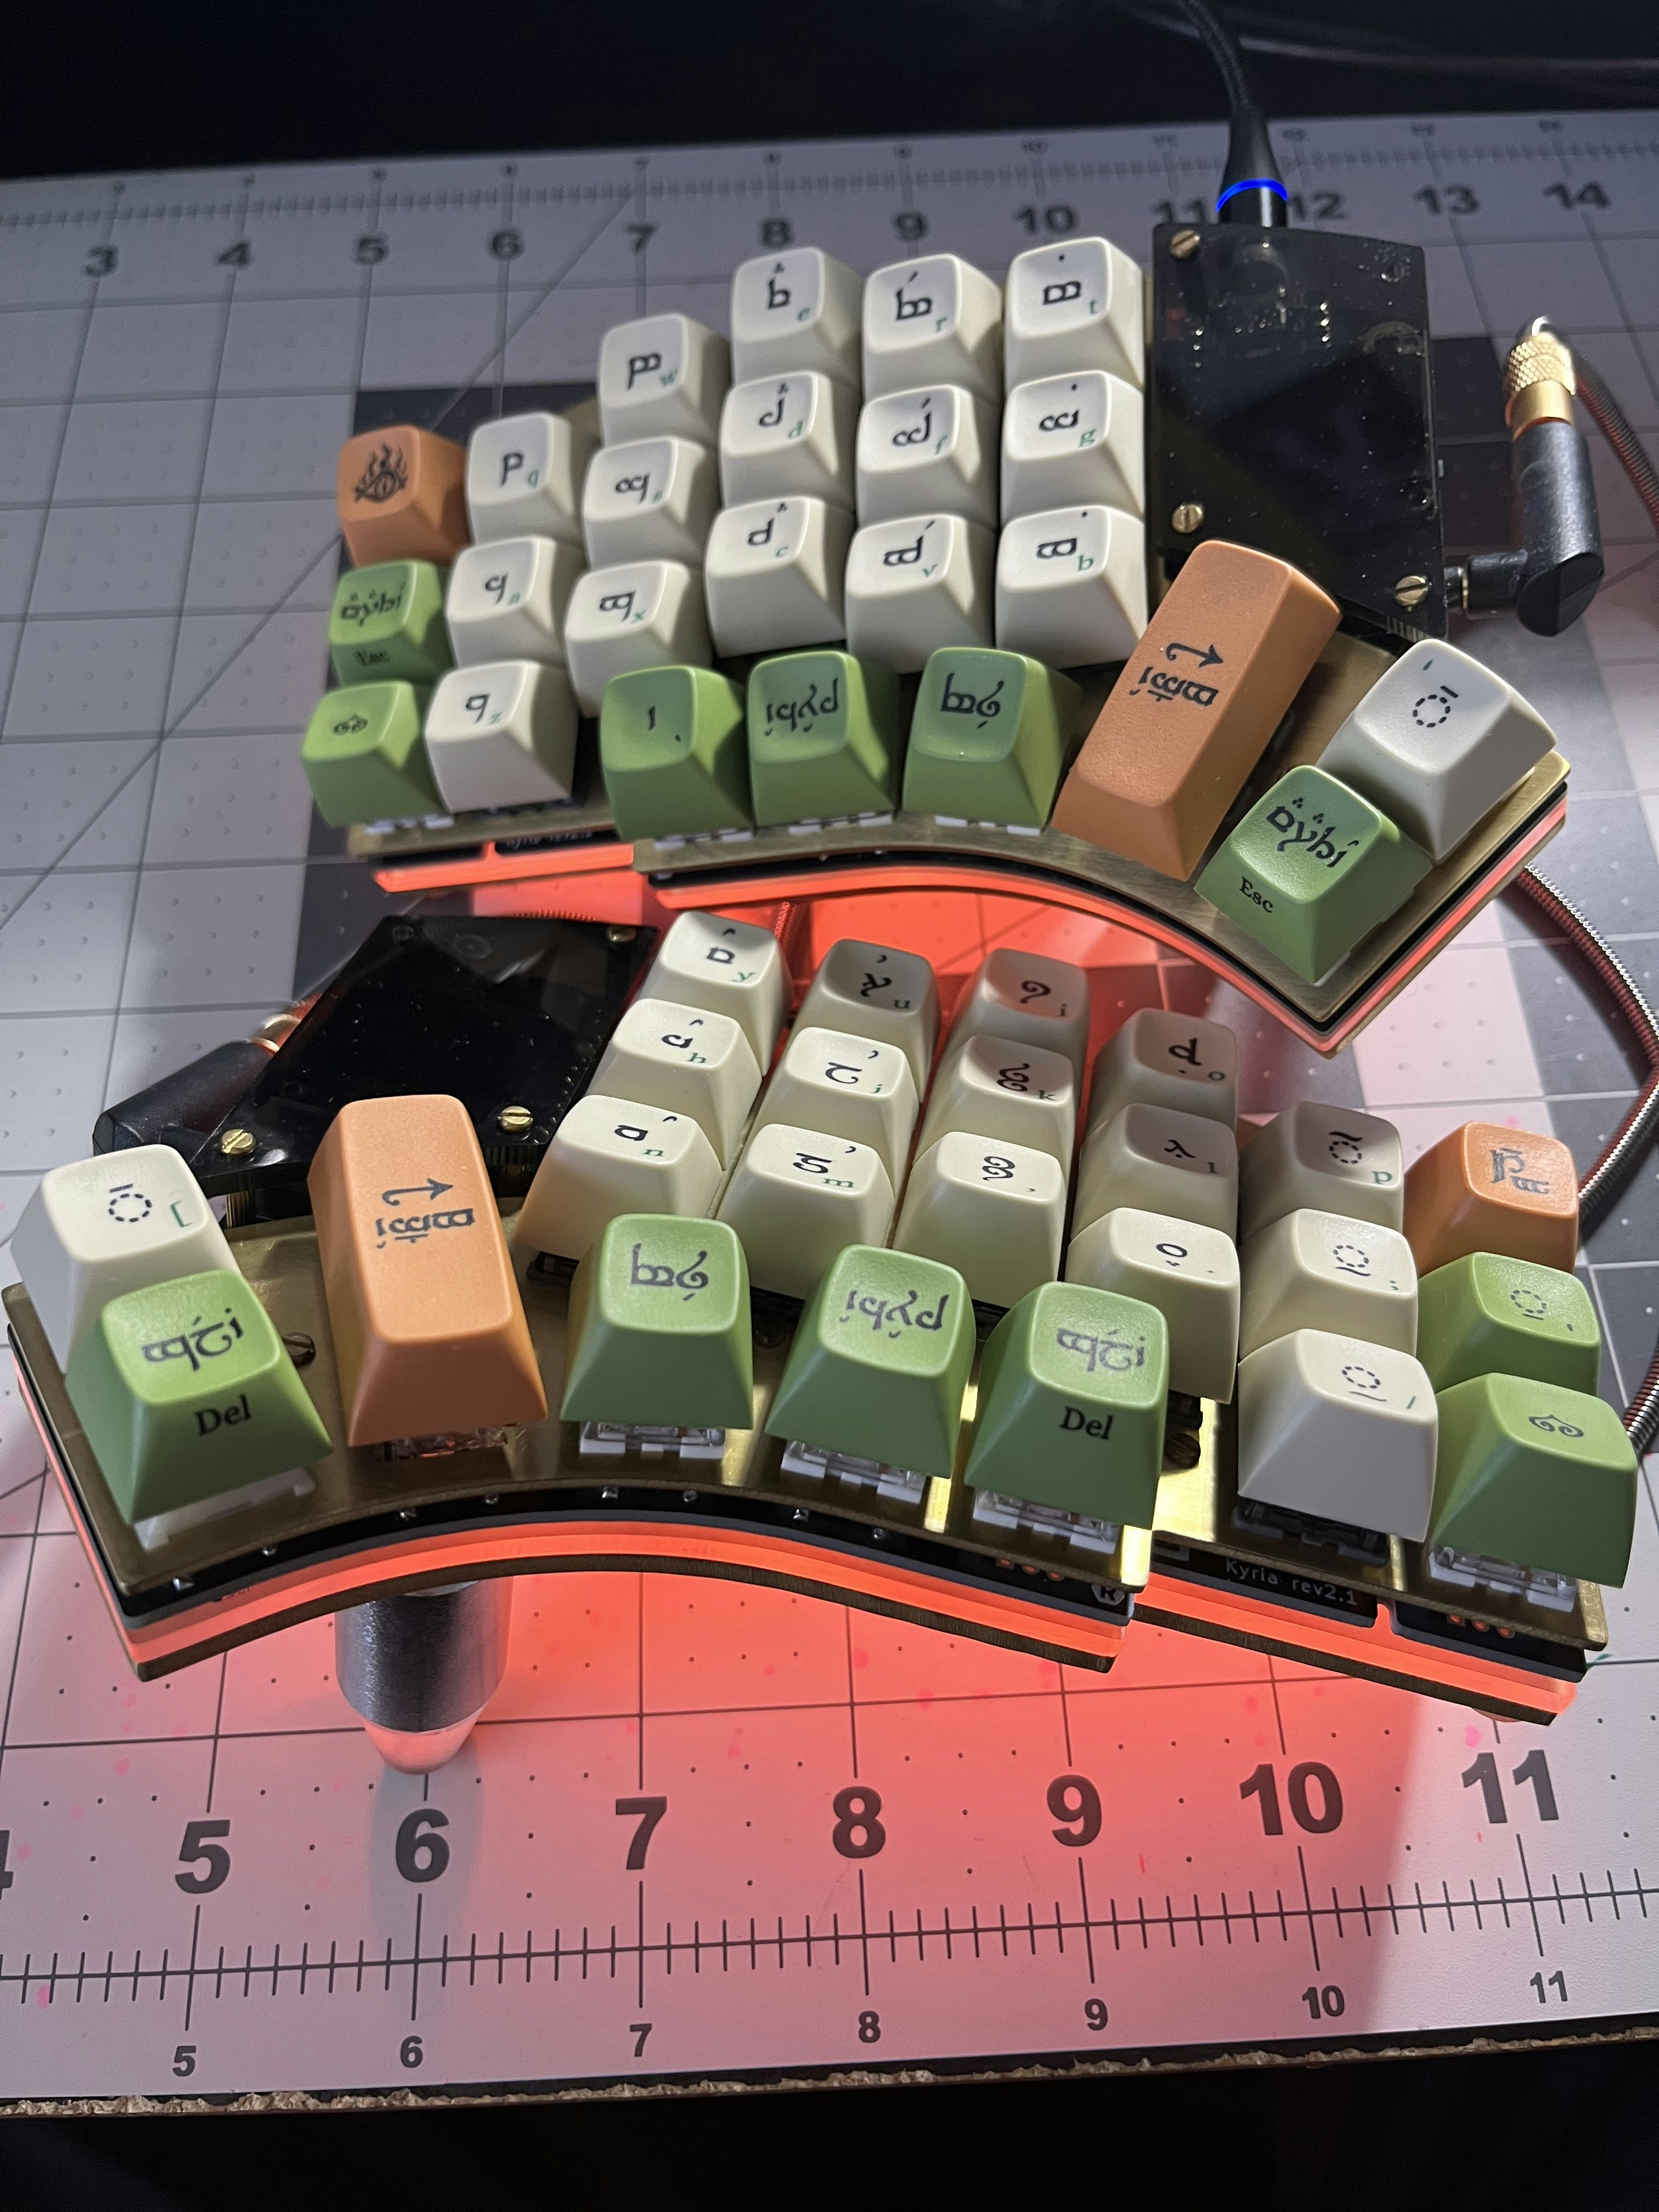 Drop + The Lord of the Rings MT3 Elvish Keycap Set | Dye-subbed